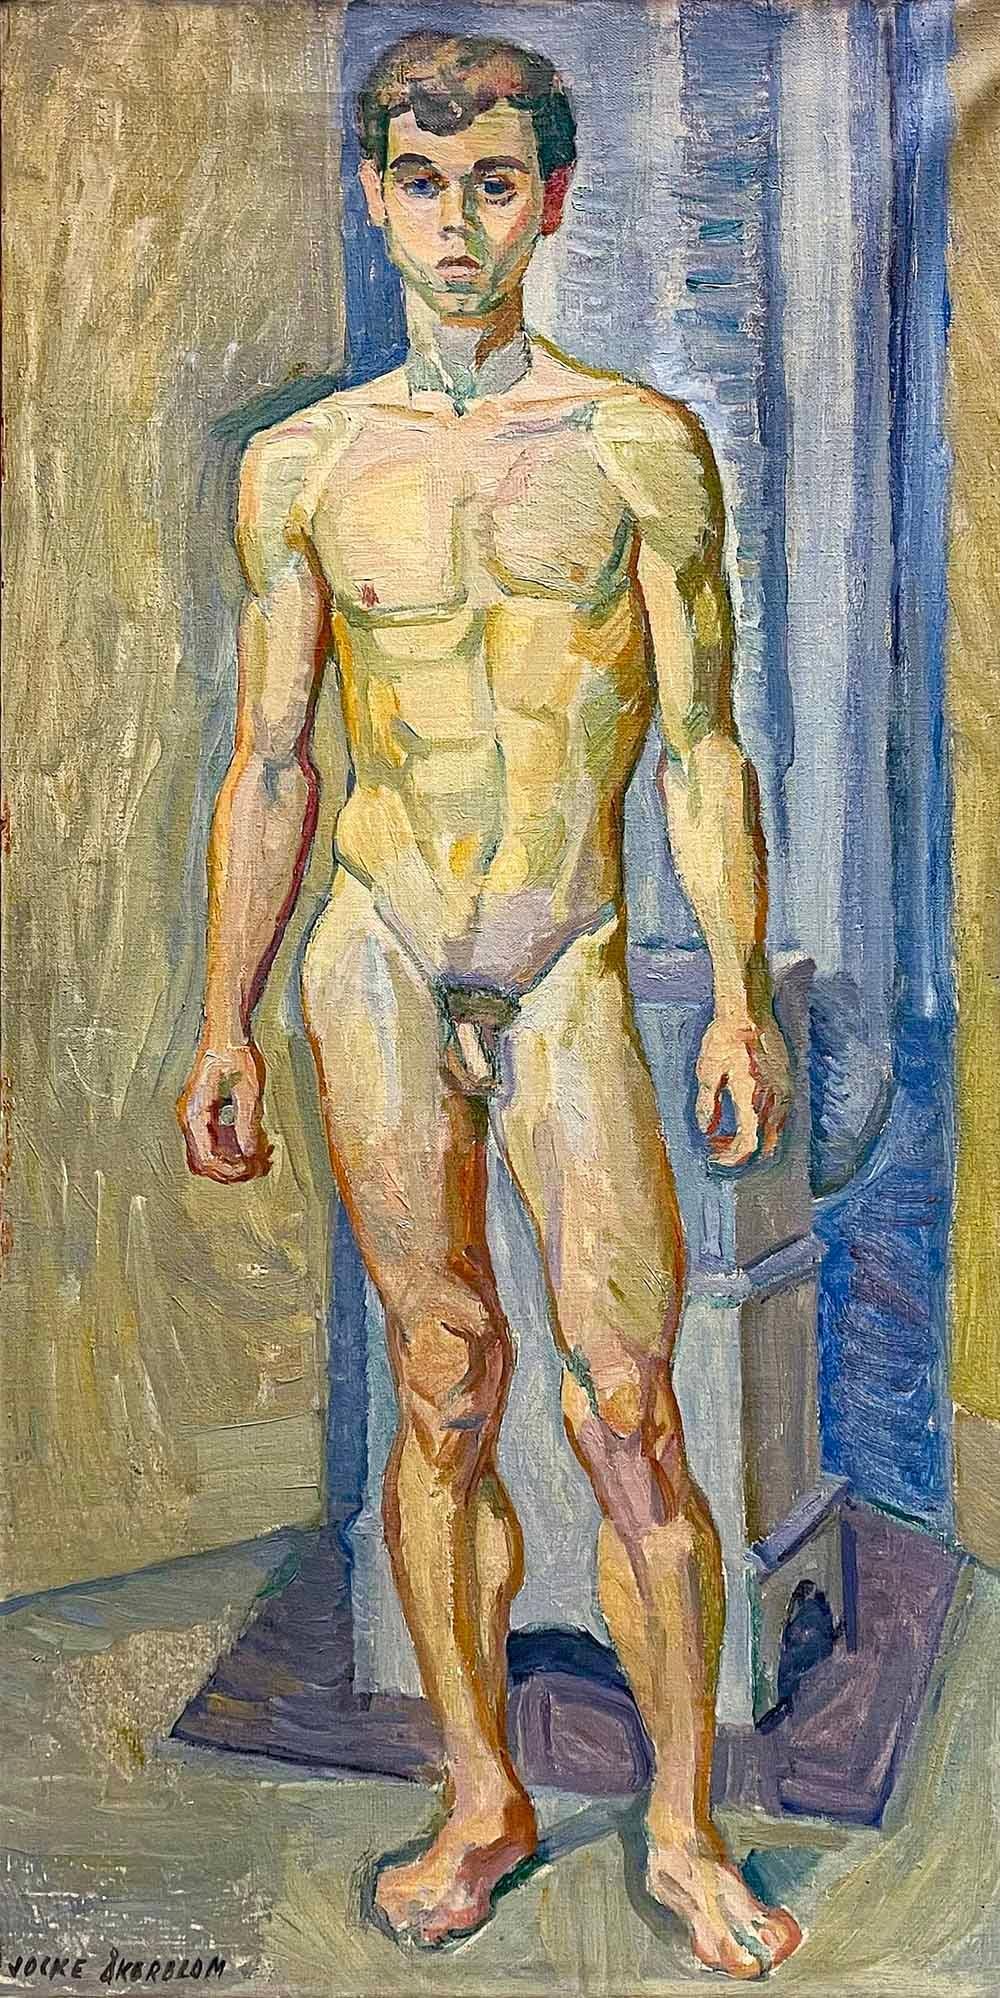 Boldly painted in an expressionist palette that calls to mind the work of Edvard Munch and other Nordic painters who were in the artistic vanguard of the 20th century, this depiction of a standing male nude was made by Jocke Åkerblom in Sweden.  The